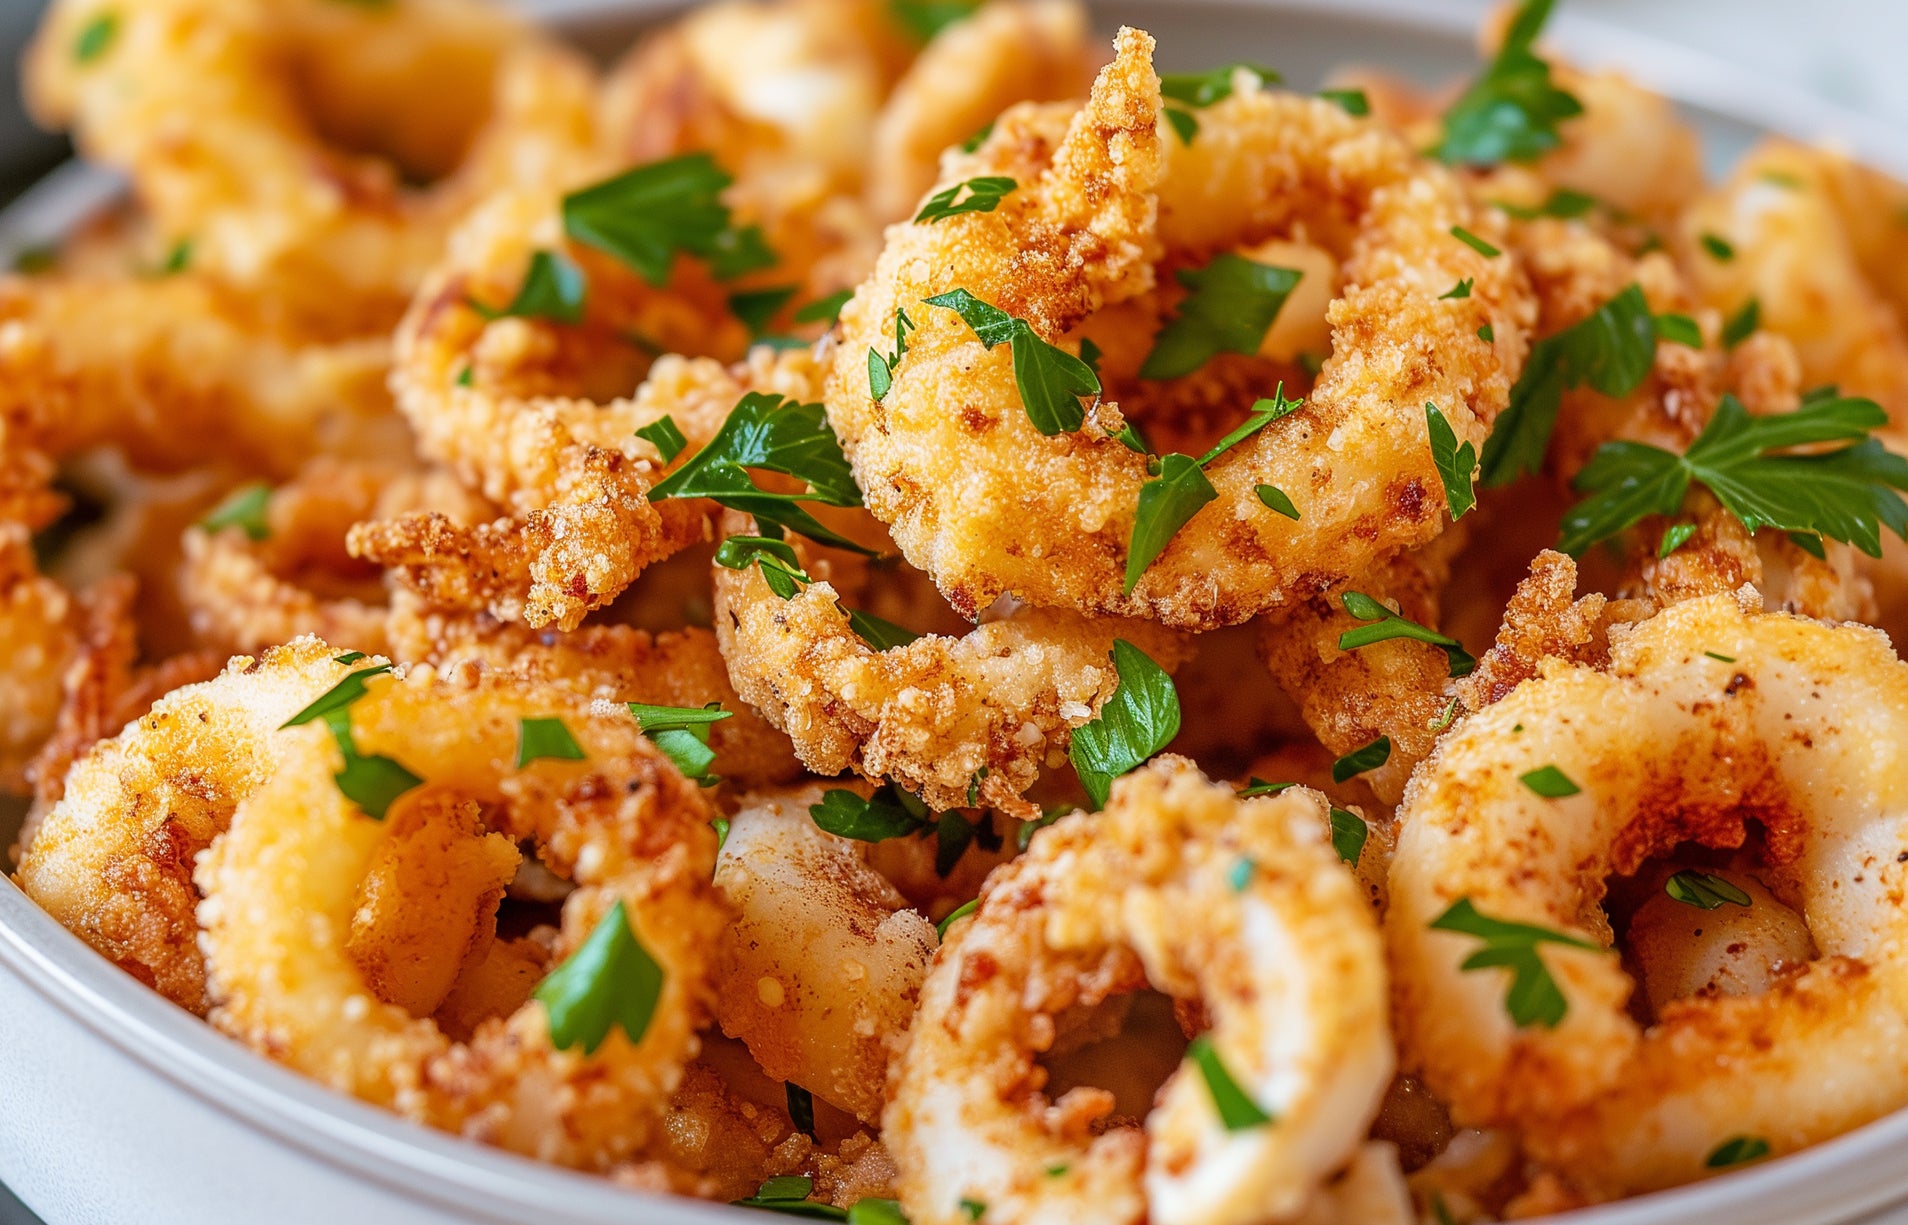 Crispy air-fried calamari with parsley by Ruokala, a healthy snack option